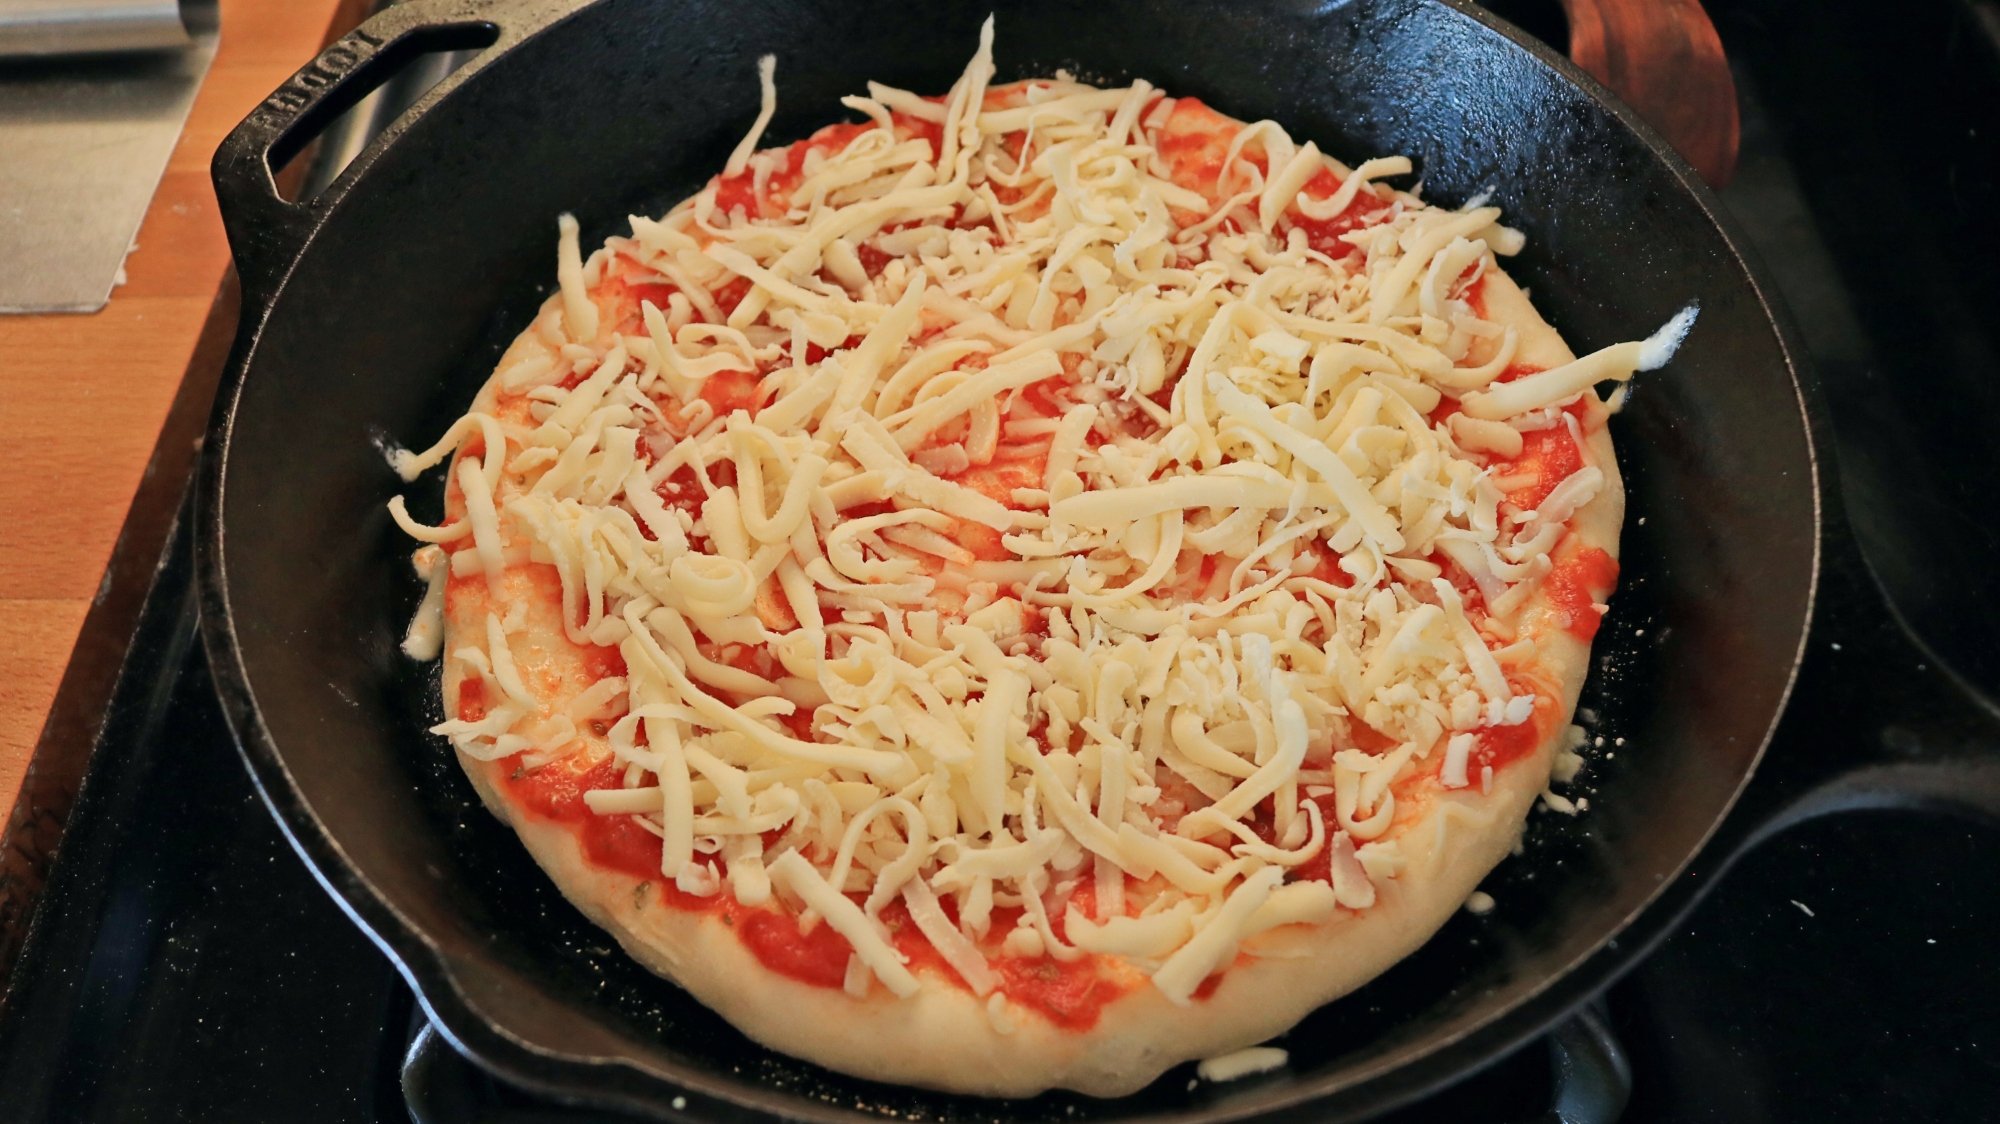 A pizza in a cast iron skillet before cooking.